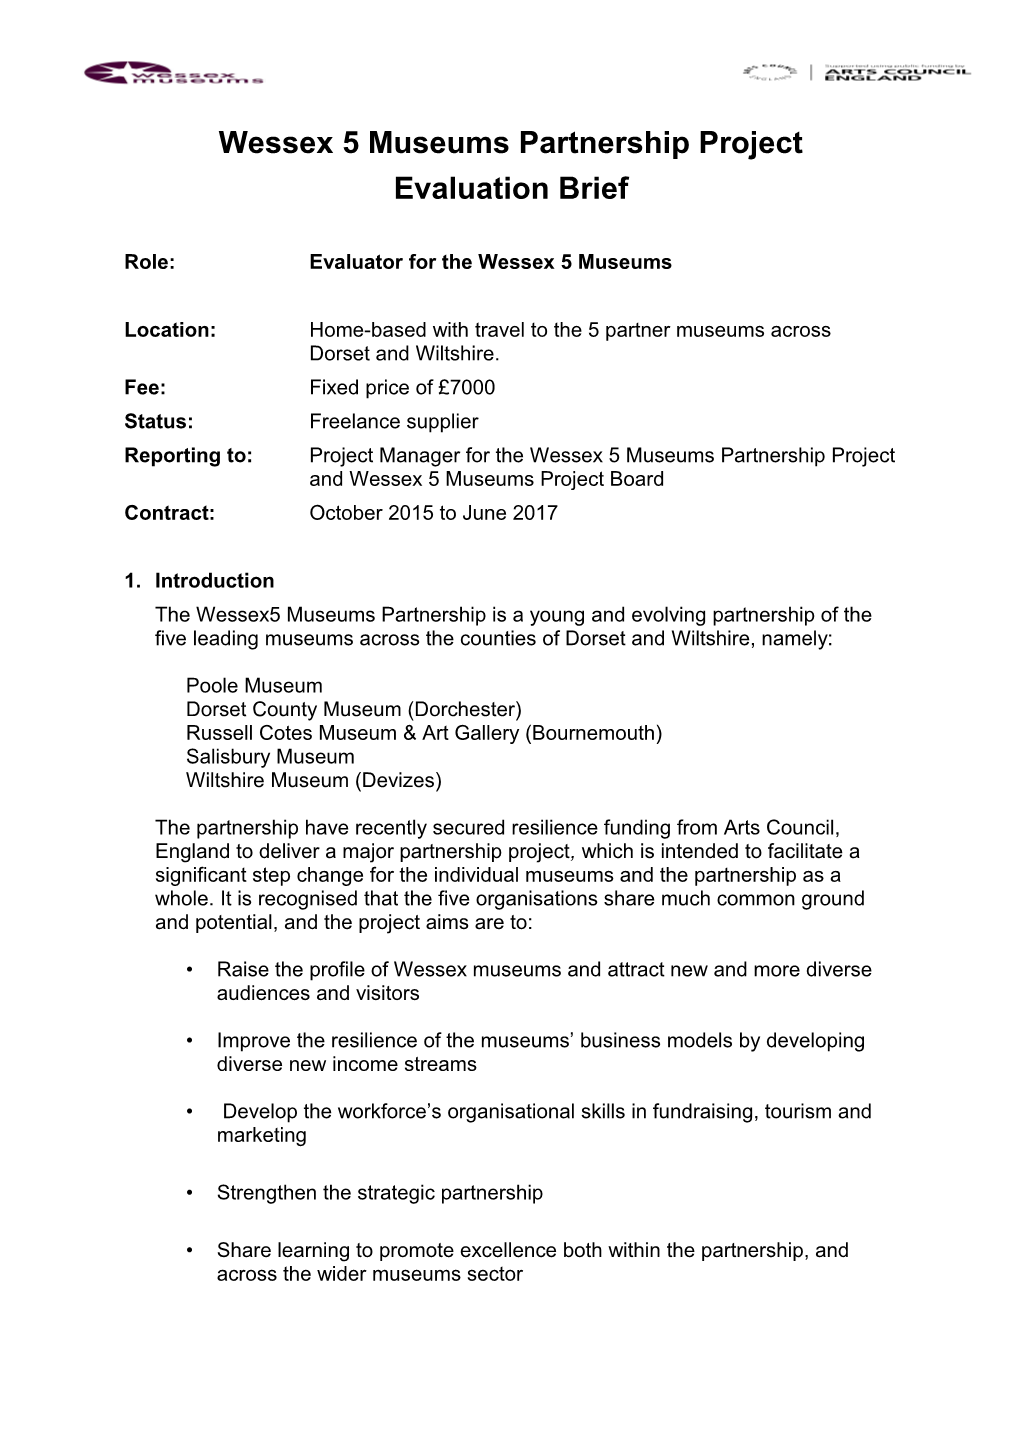 Role:Evaluator for the Wessex 5 Museums